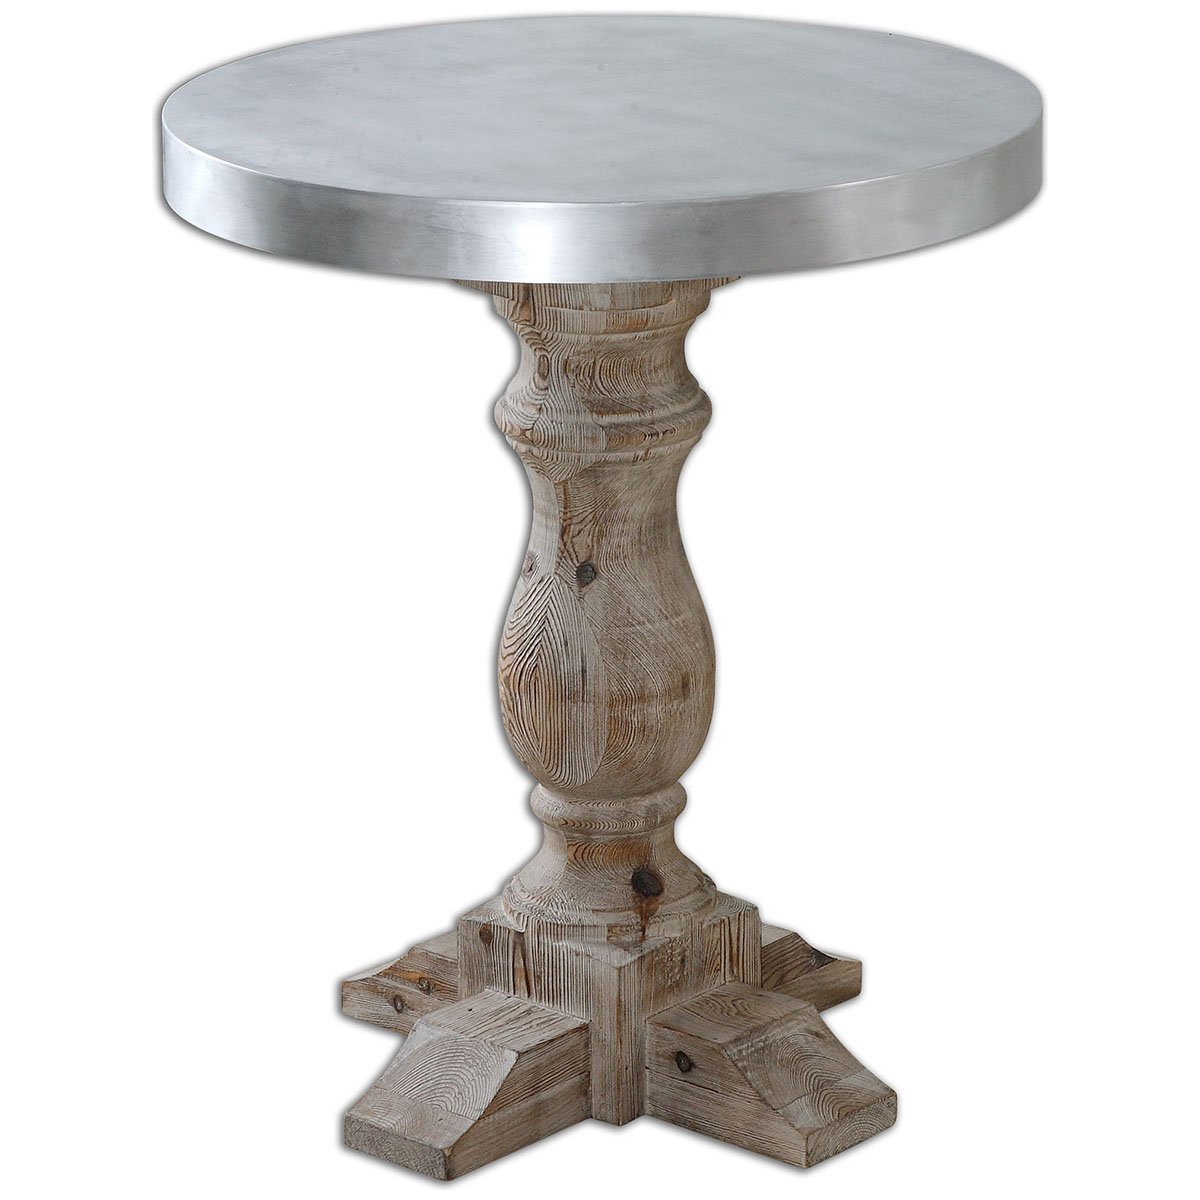 uttermost martel accent table kitchen dining round mosaic garden outdoor furniture covers monarch hall console patio with umbrella hole pottery barn glass top coffee best computer